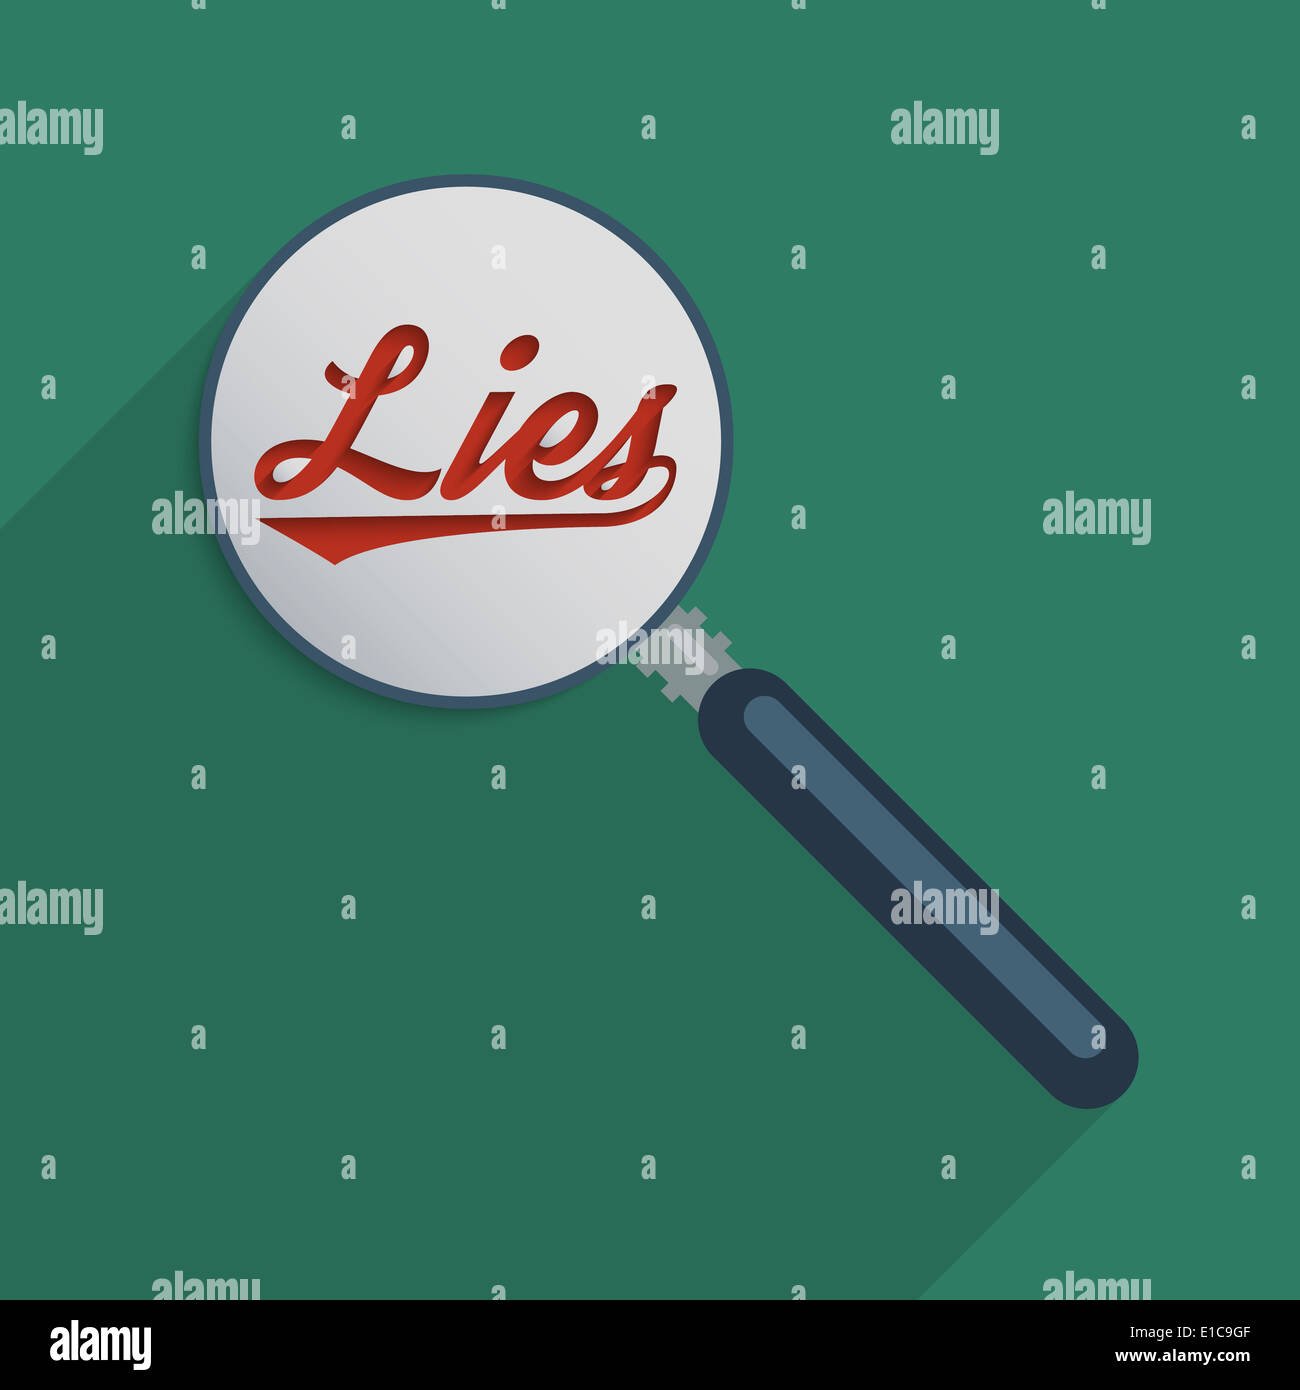 Concept for finding the truth, disinformation, propaganda and information security. Flat design illustration. Stock Photo